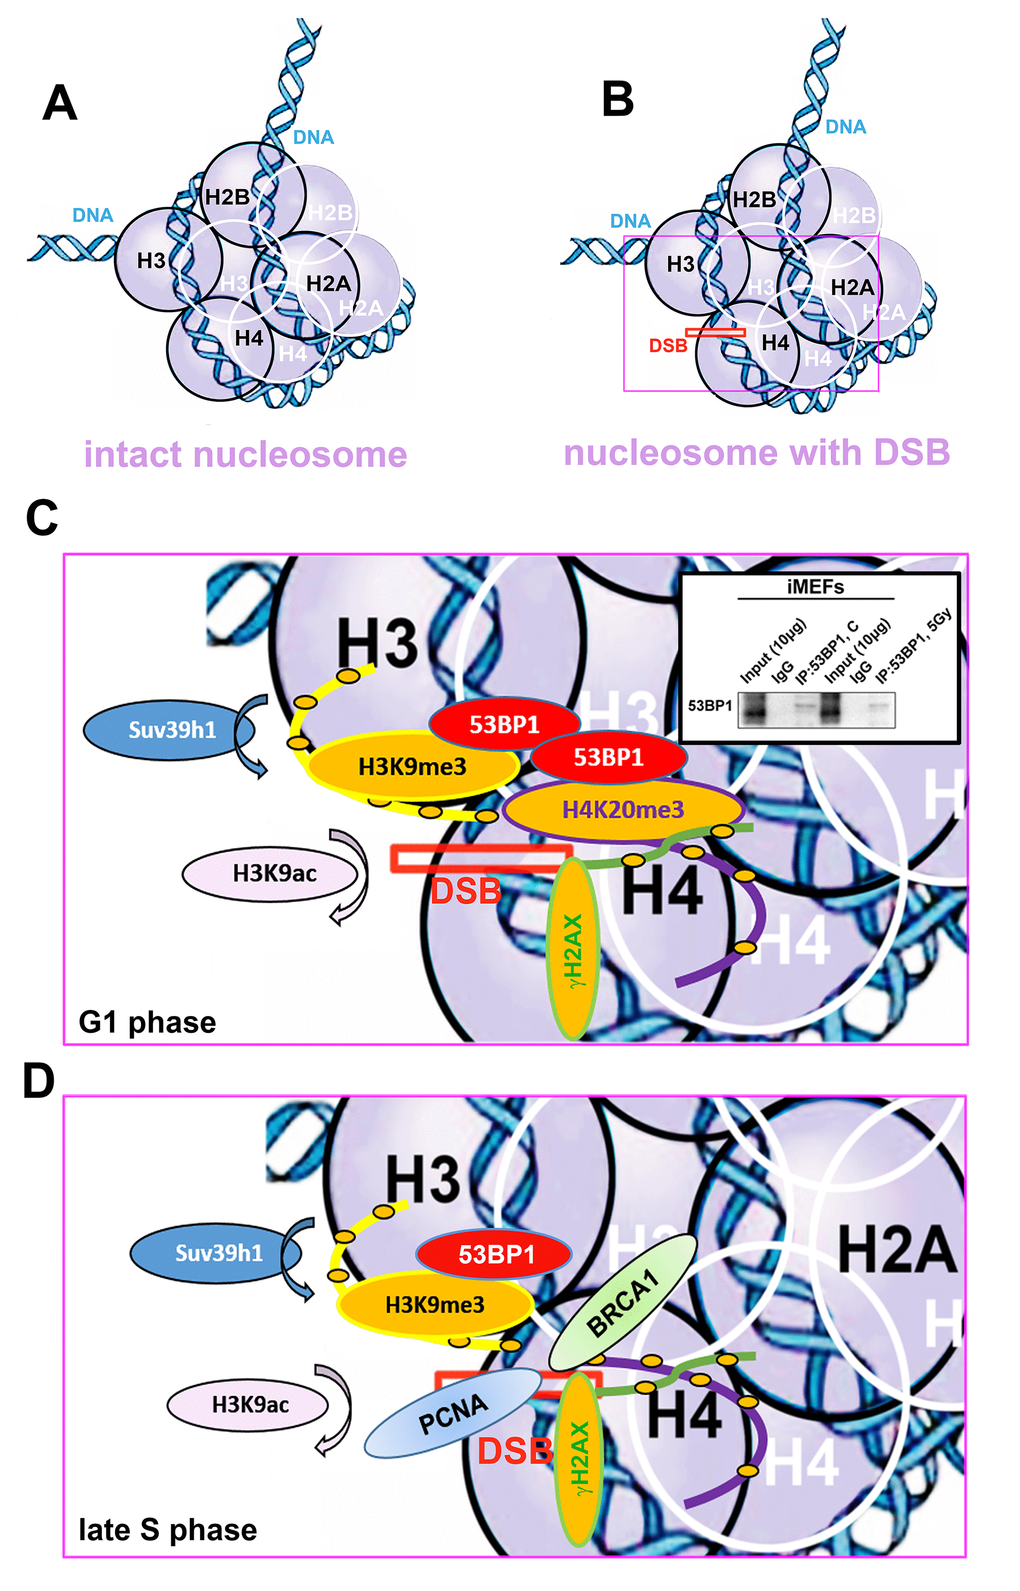 Schematic illustration of a nucleosome with DSB occupied by studied proteins of interest in G1 and late S phase of the cell cycle. (A) Schema of an intact nucleosome. (B) Nucleosome with wound DNA with DSB. (C) A pictorial illustration of histone signature and recruitment of the 53BP1 protein to DNA lesions in the G1 phase of the cell cycle. Immunoprecipitation result shows dimerization of 53BP1 protein. (D) An illustration of histone signature and recruitment of PCNA and BRCA1 proteins to DNA lesions in late S phase of the cell cycle. Panels represent a schematic illustration of the results.